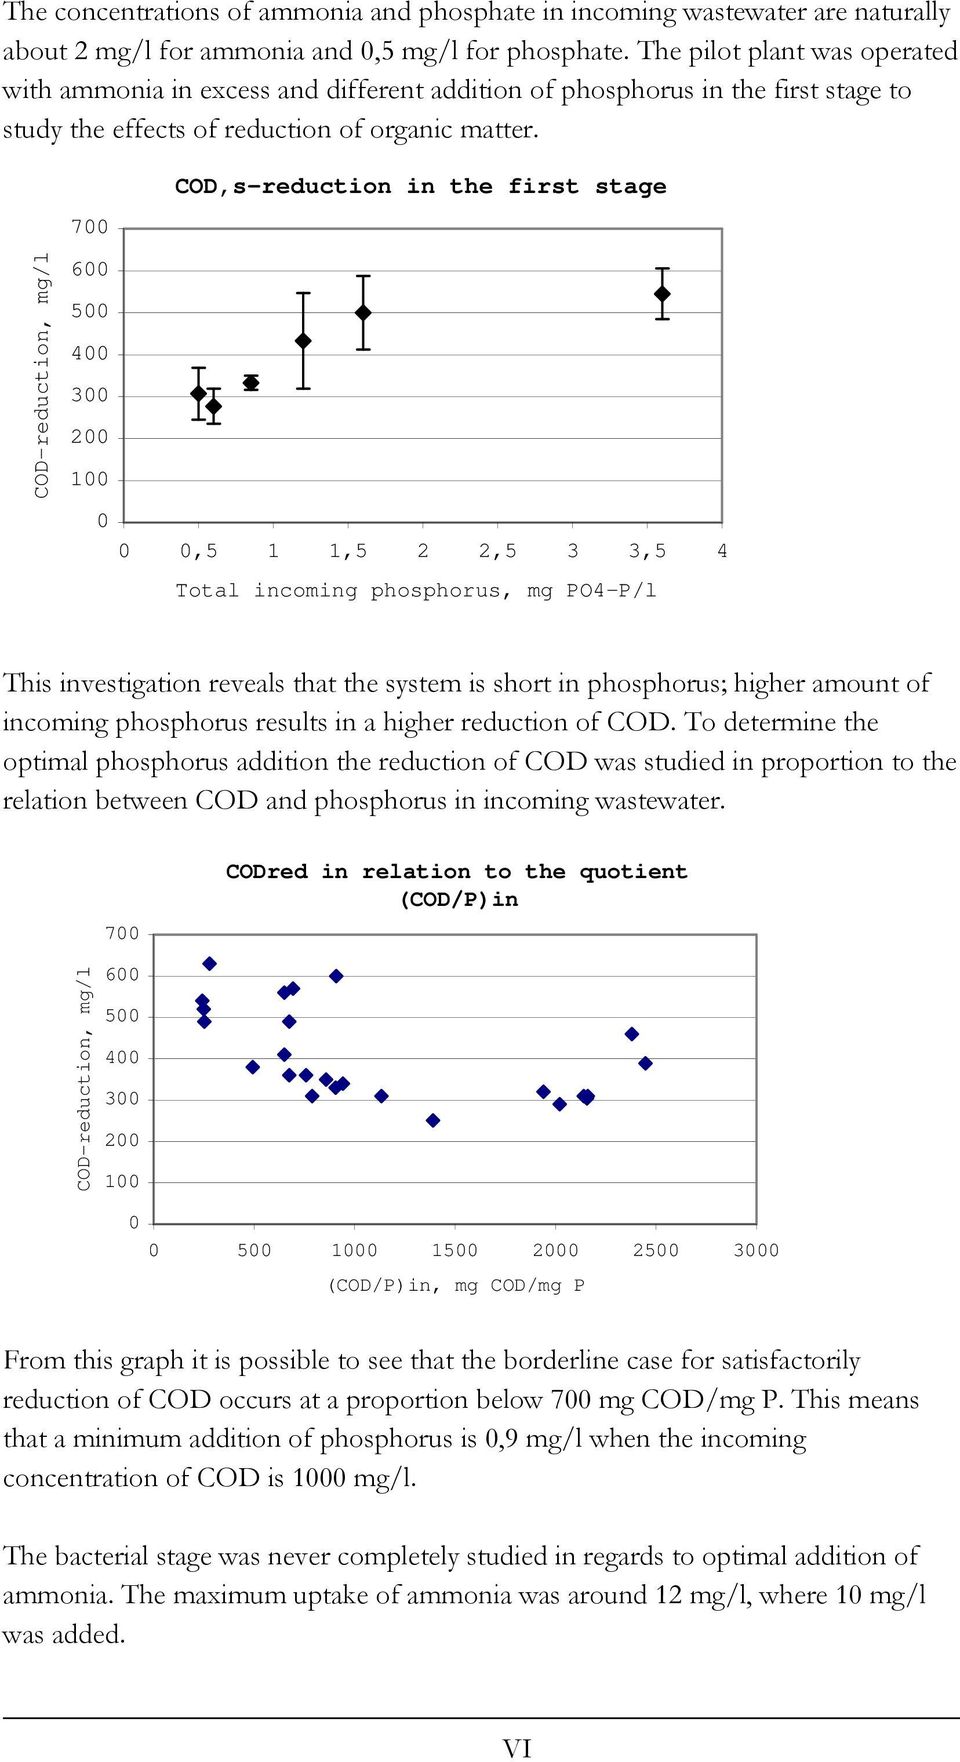 700 COD,s-reduction in the first stage COD-reduction, mg/l 600 500 400 300 200 100 0 0 0,5 1 1,5 2 2,5 3 3,5 4 Total incoming phosphorus, mg PO4-P/l This investigation reveals that the system is